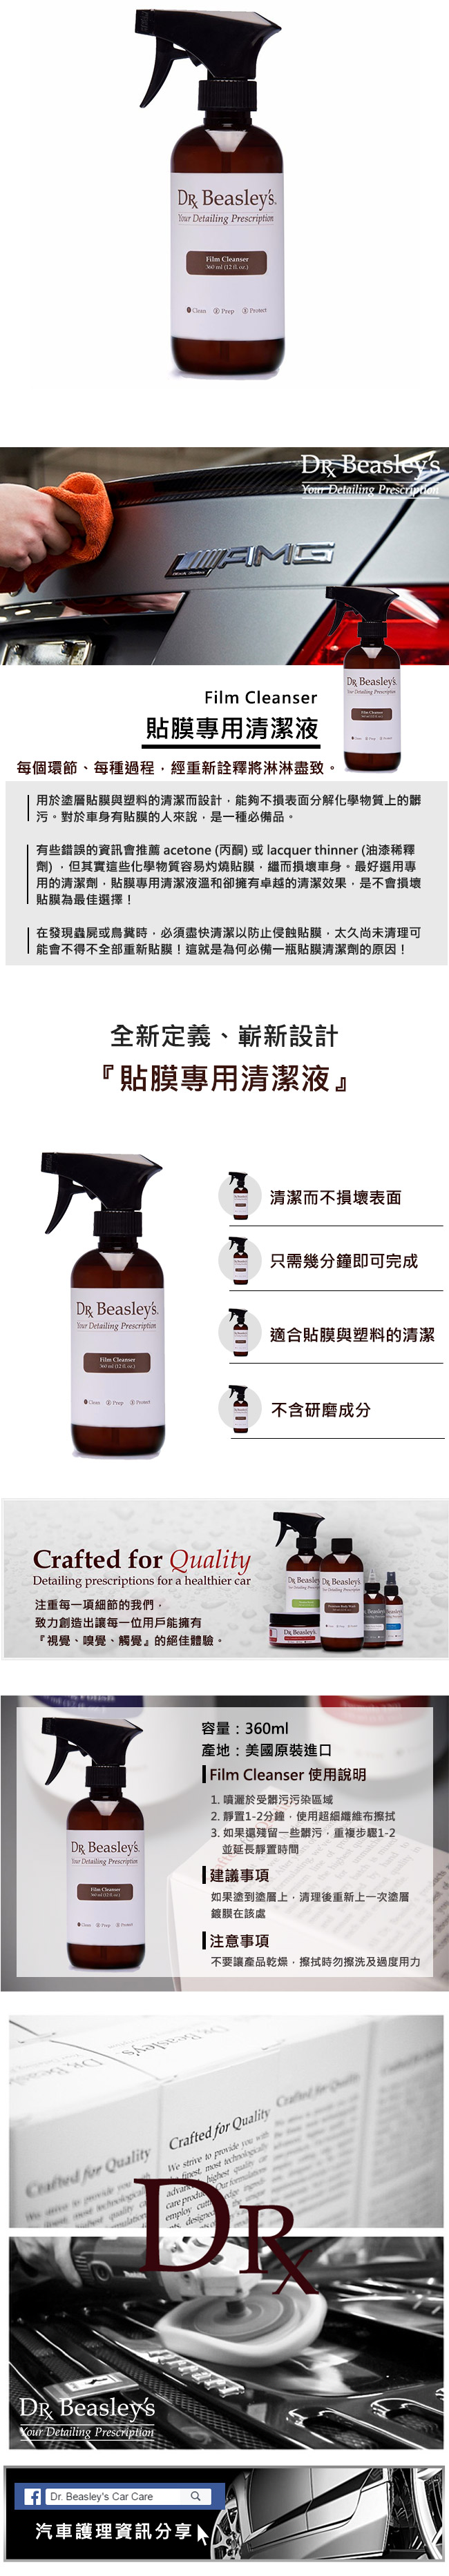 Dr. Beasley s 貼膜專用清潔液 Film Cleanser